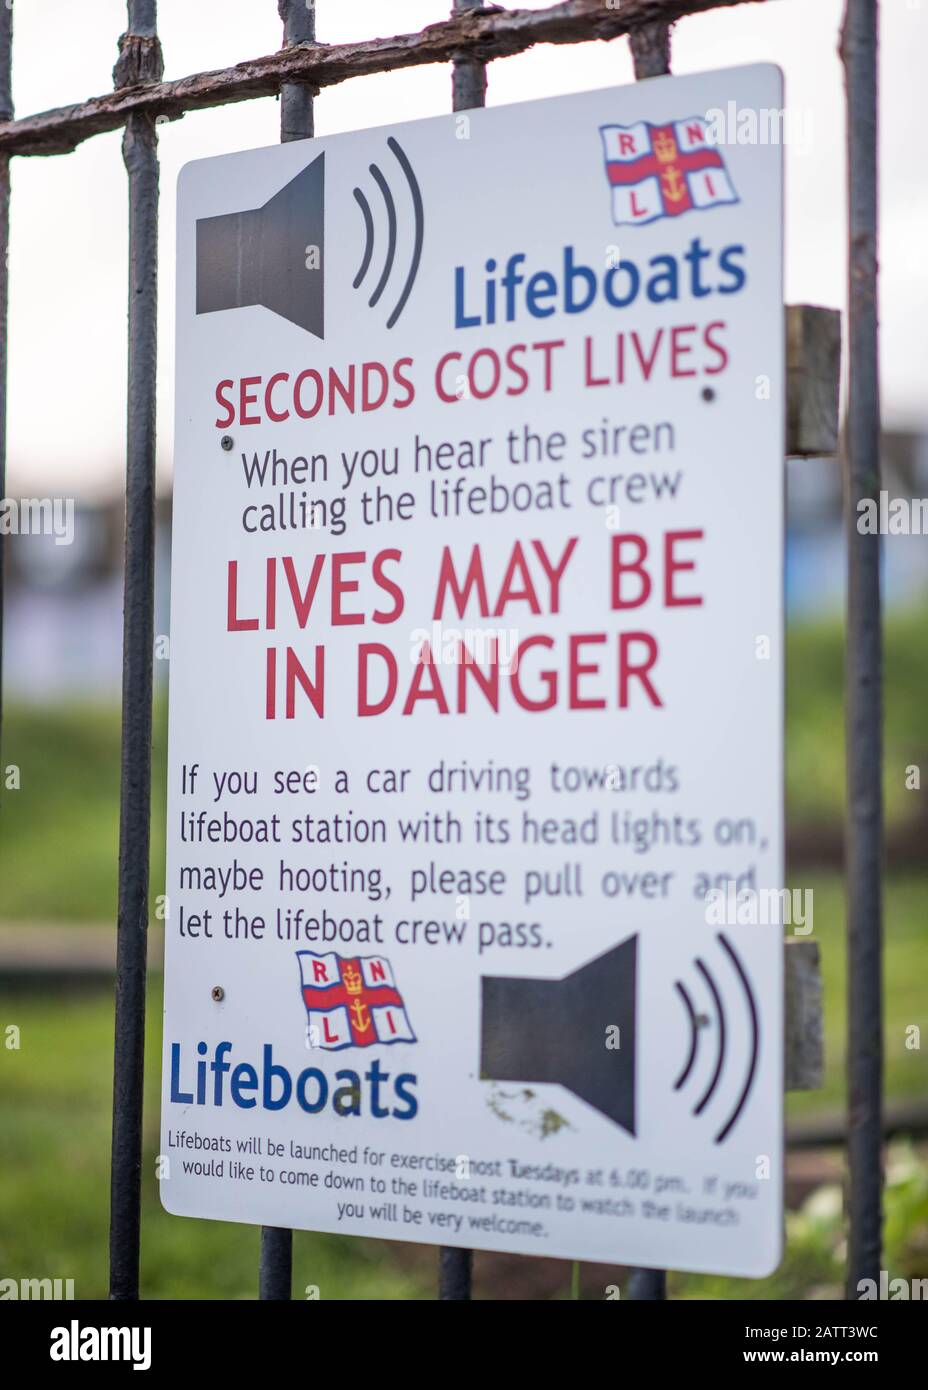 RNLI Lifeboat siren alert sign mounted on metal railings in the coastal village of Appledore in North Devon, England Stock Photo